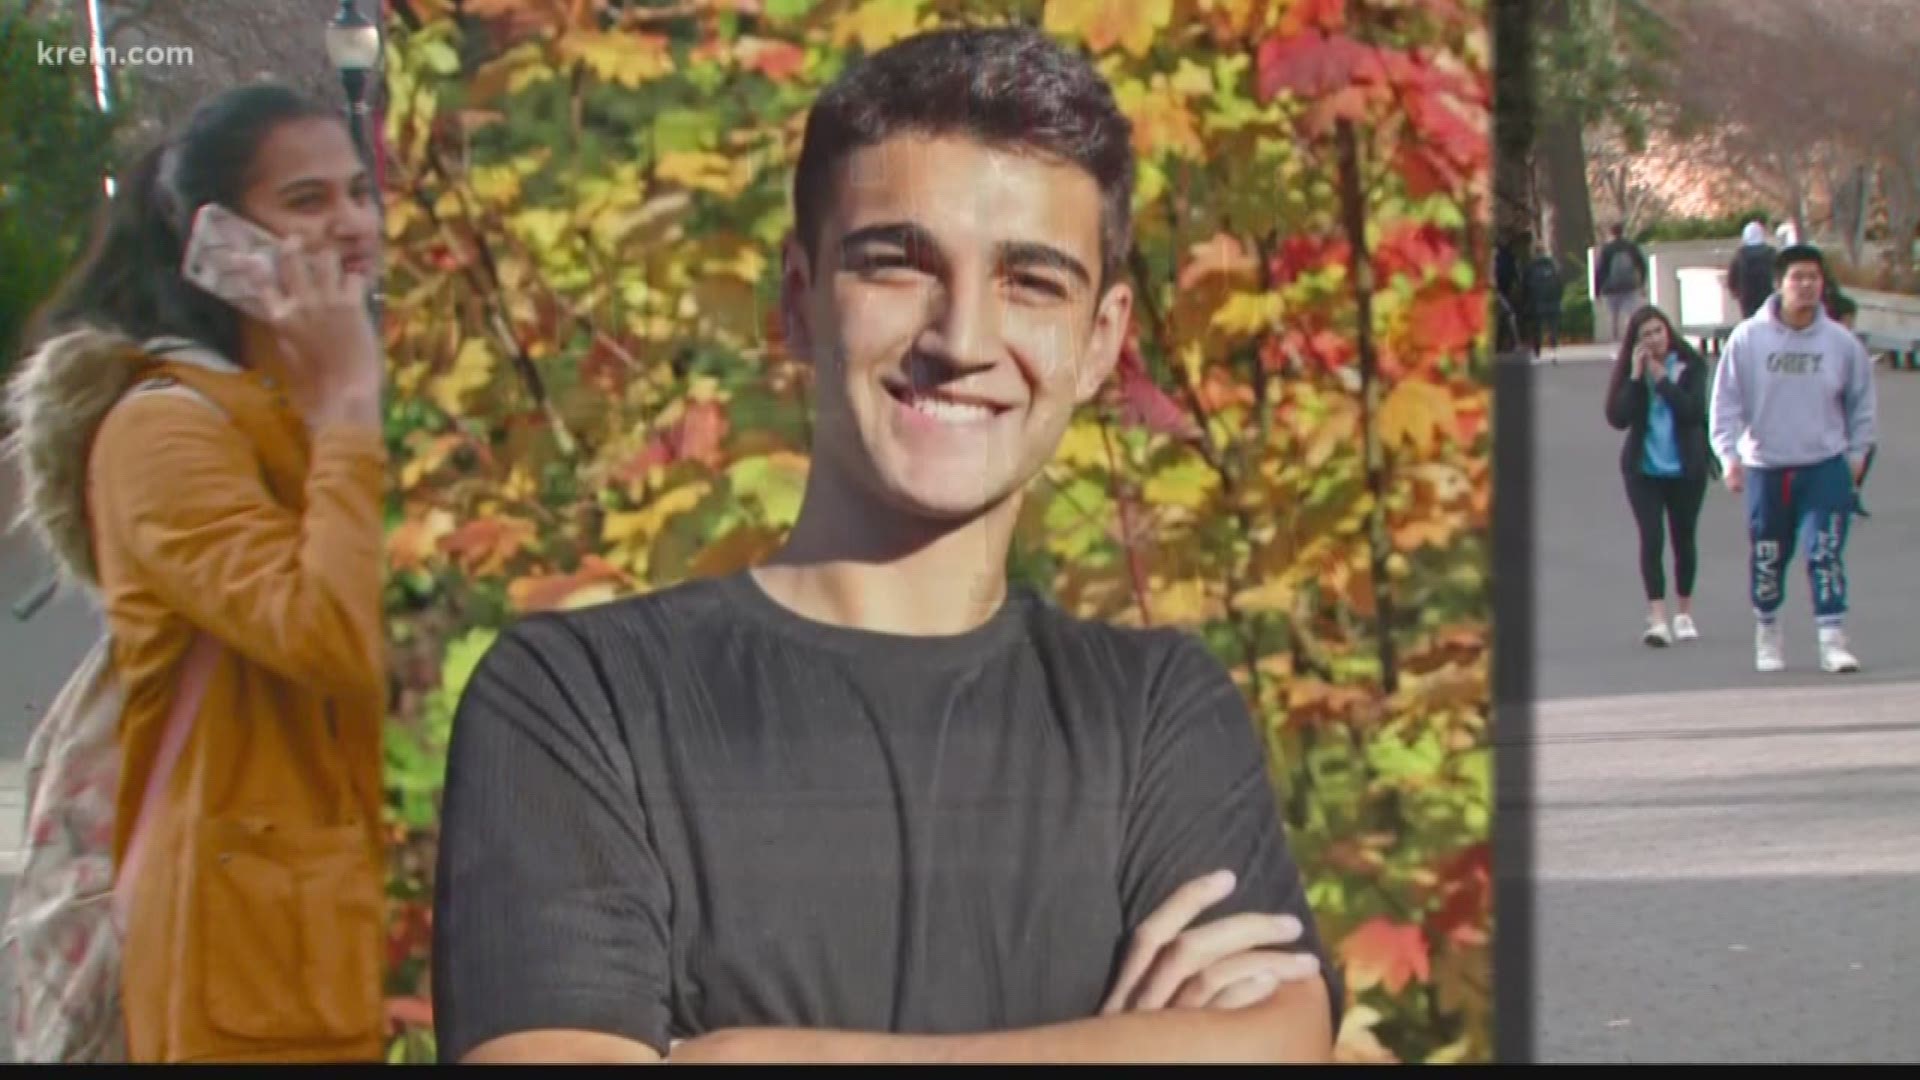 WSU and the Pullman Police Department are investigating hazing as a possible factor in the death of 19-year-old Sam Martinez. The police previously ruled it out.